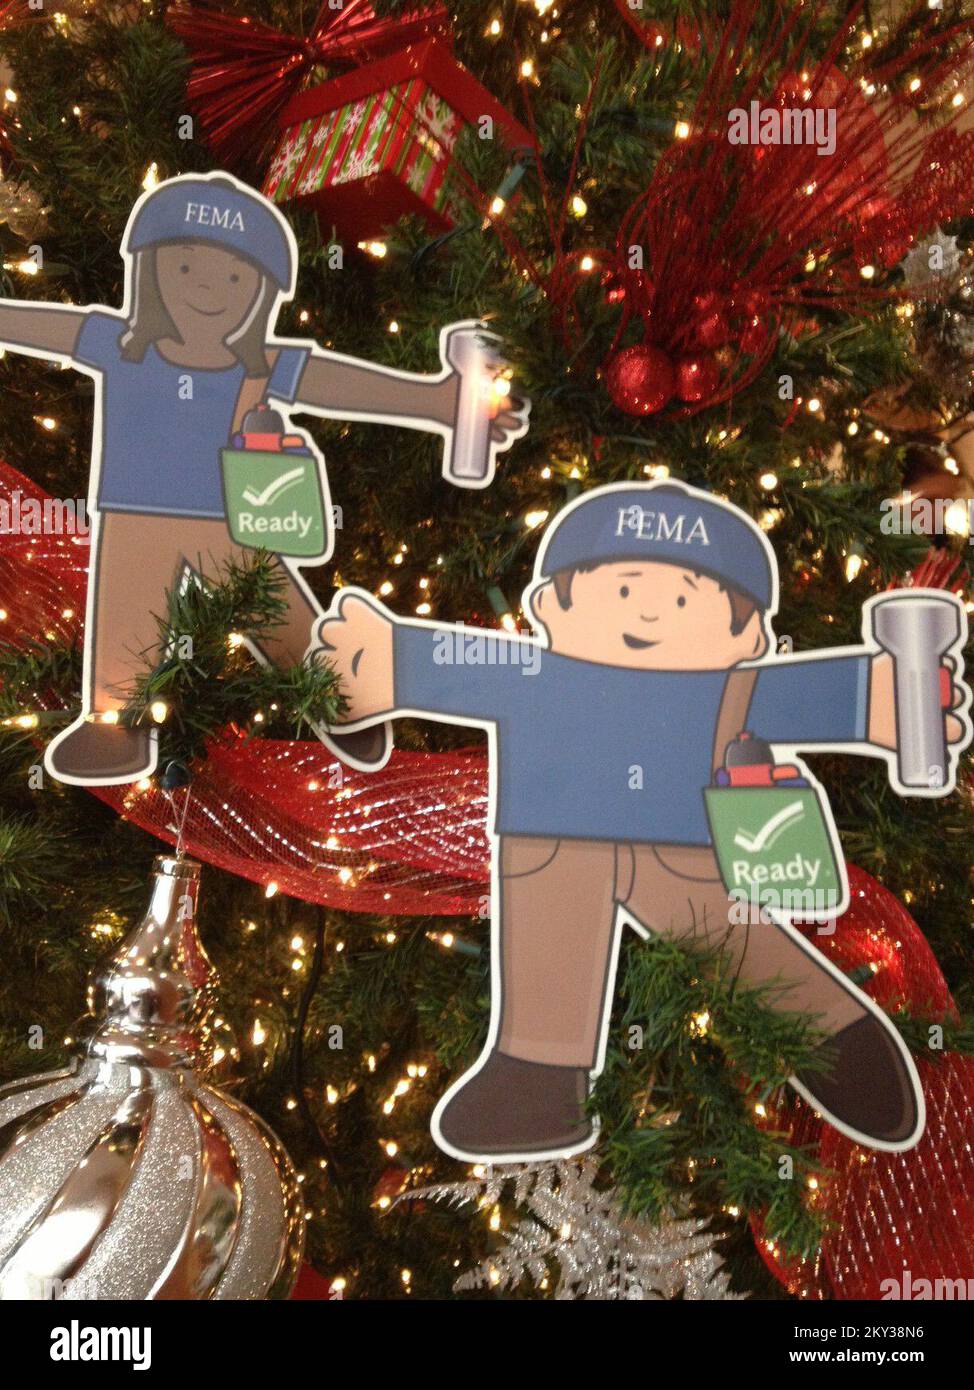 https://c8.alamy.com/comp/2KY38N6/washington-dc-dec-7-2012-fema-flat-stanley-and-stella-learn-about-holiday-fire-safety-and-the-importance-of-using-fire-sfae-lights-when-decorating-photographs-relating-to-disasters-and-emergency-management-programs-activities-and-officials-2KY38N6.jpg